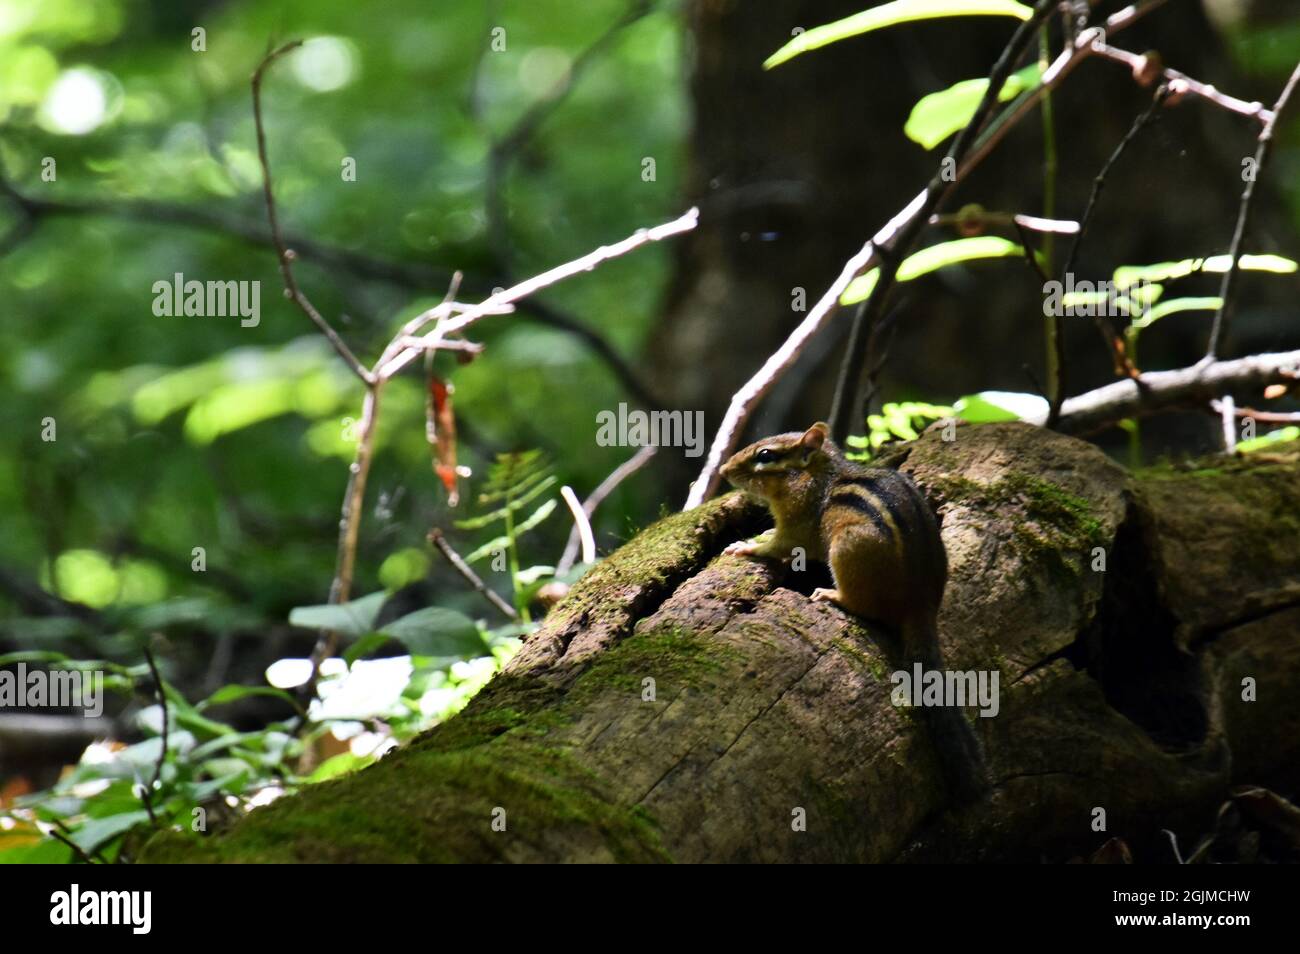 A small chipmunk (Tamias striatus) sits on a log in the forest Stock Photo